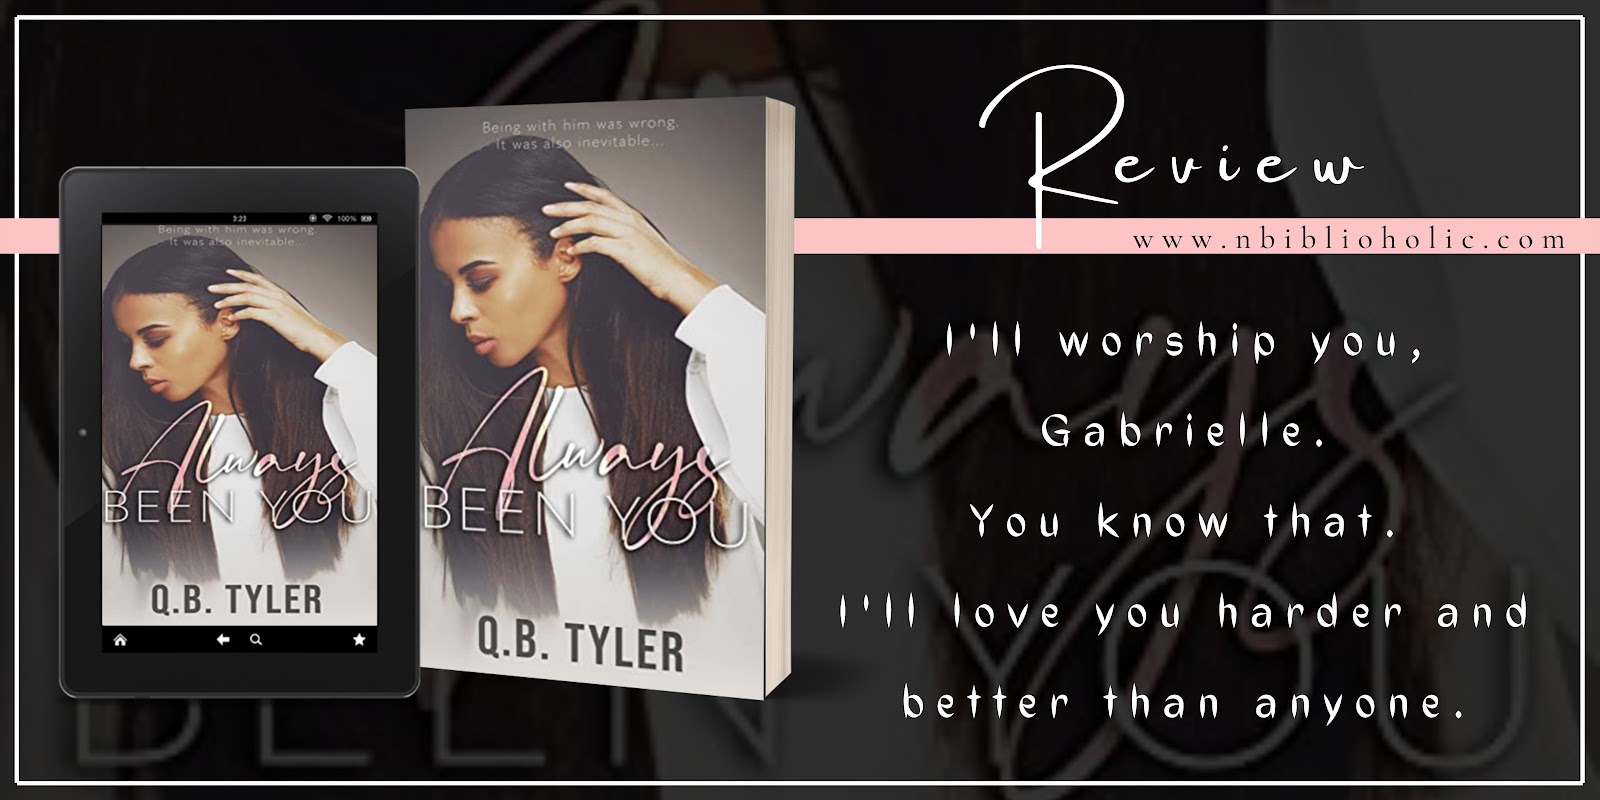 Always Been You by Q.B. Tyler